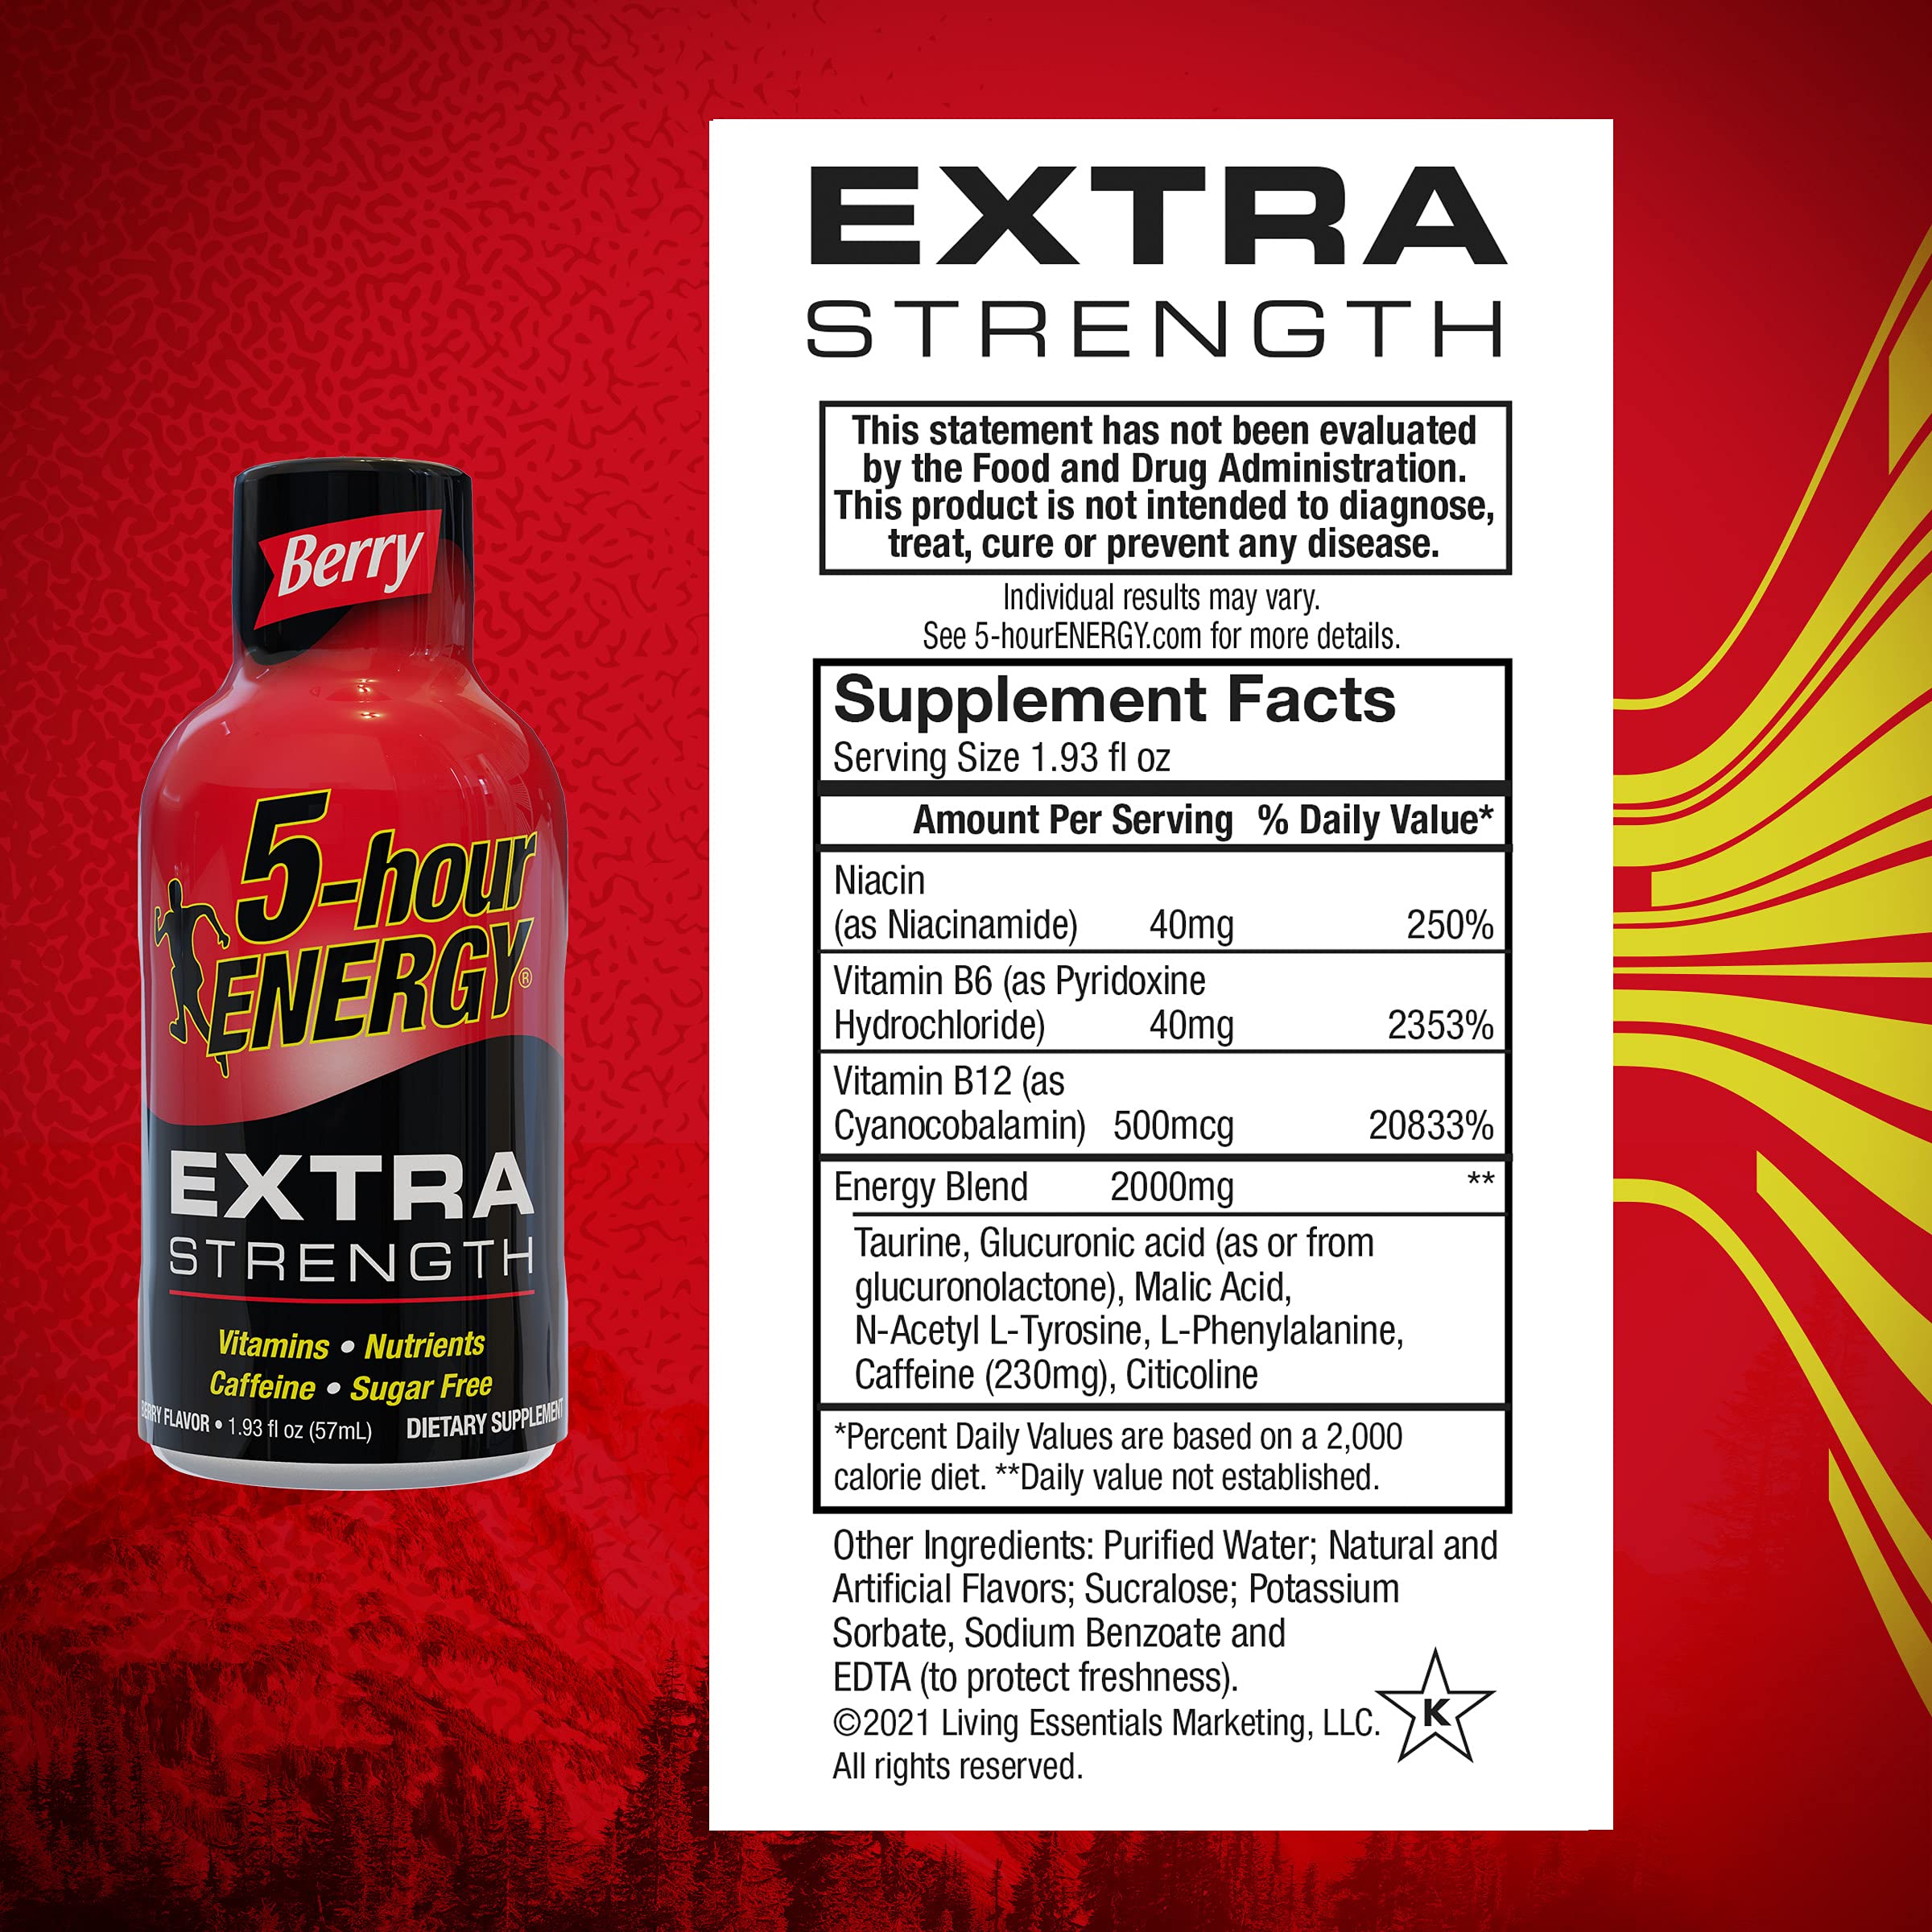 5-Hour ENERGY Shots Extra Strength | Berry Flavor | 1.93 oz. 30 Count | Sugar Free 4 Calories | Amino Acids and Essential B Vitamins | Dietary Supplement | Feel Alert and Energized